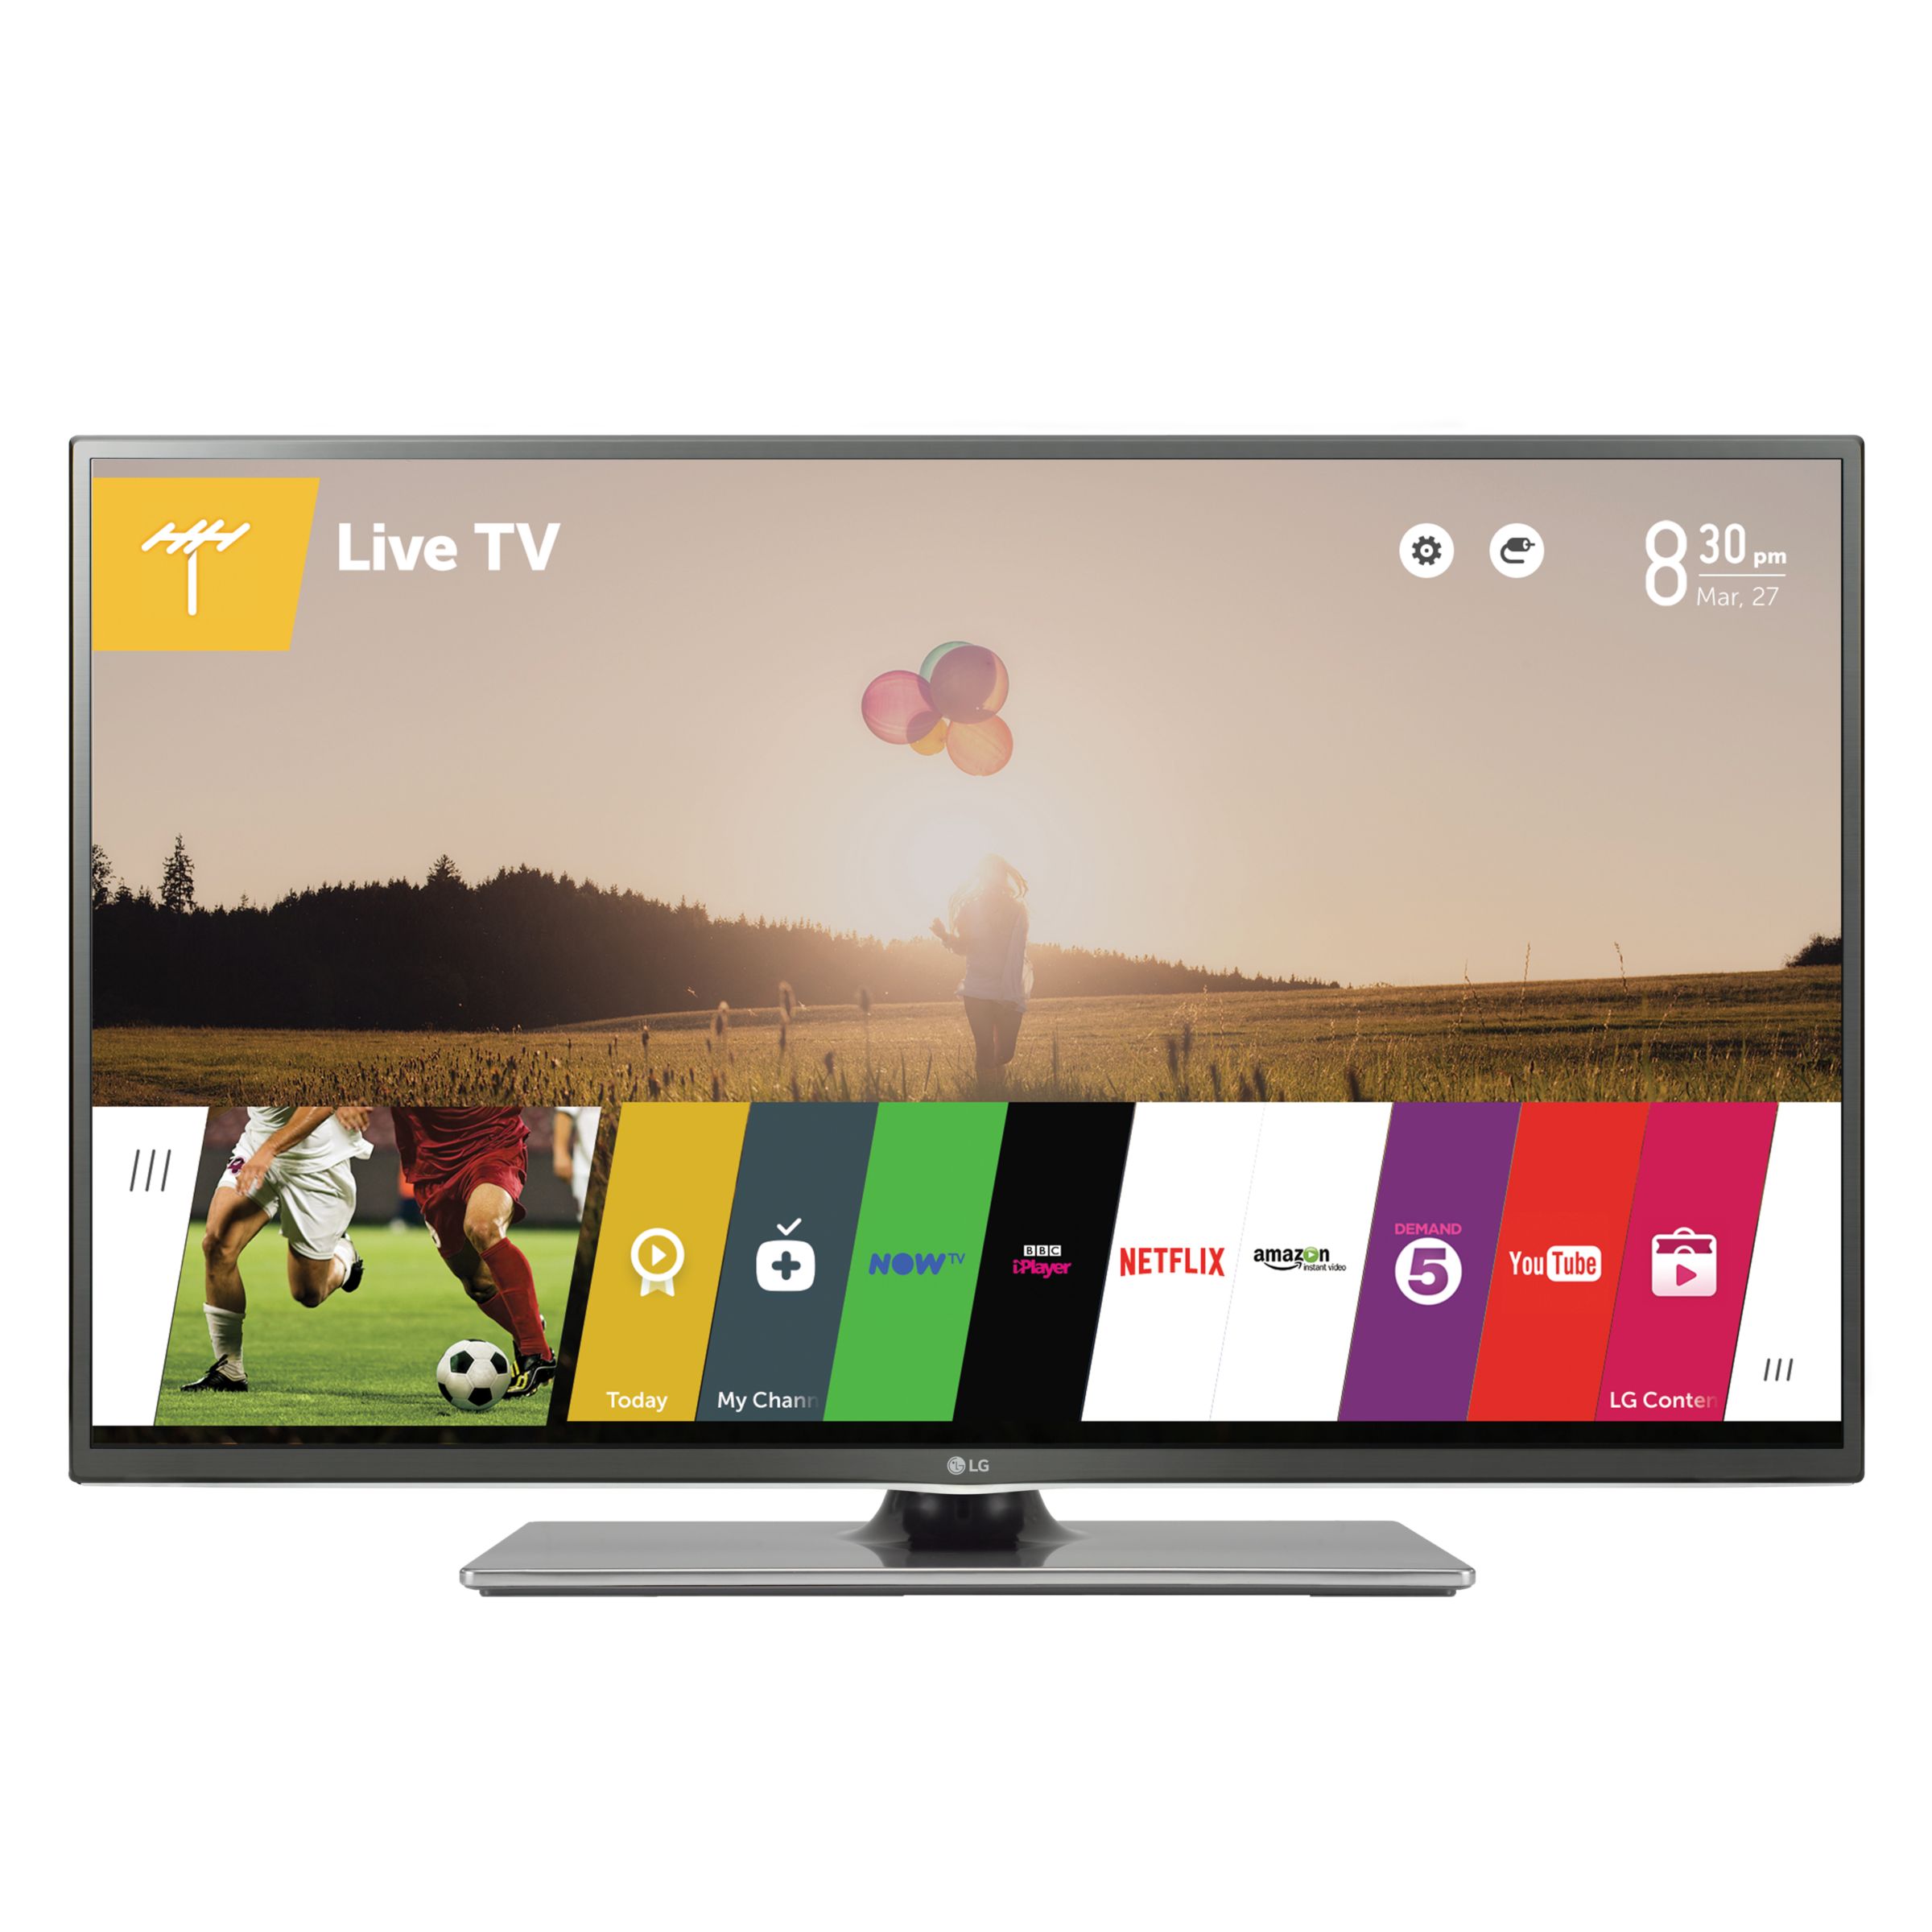 LG 42LF652V LED HD 1080p 3D Smart TV, 42" with Freeview HD, Built-In Wi-Fi & 2x 3D Glasses